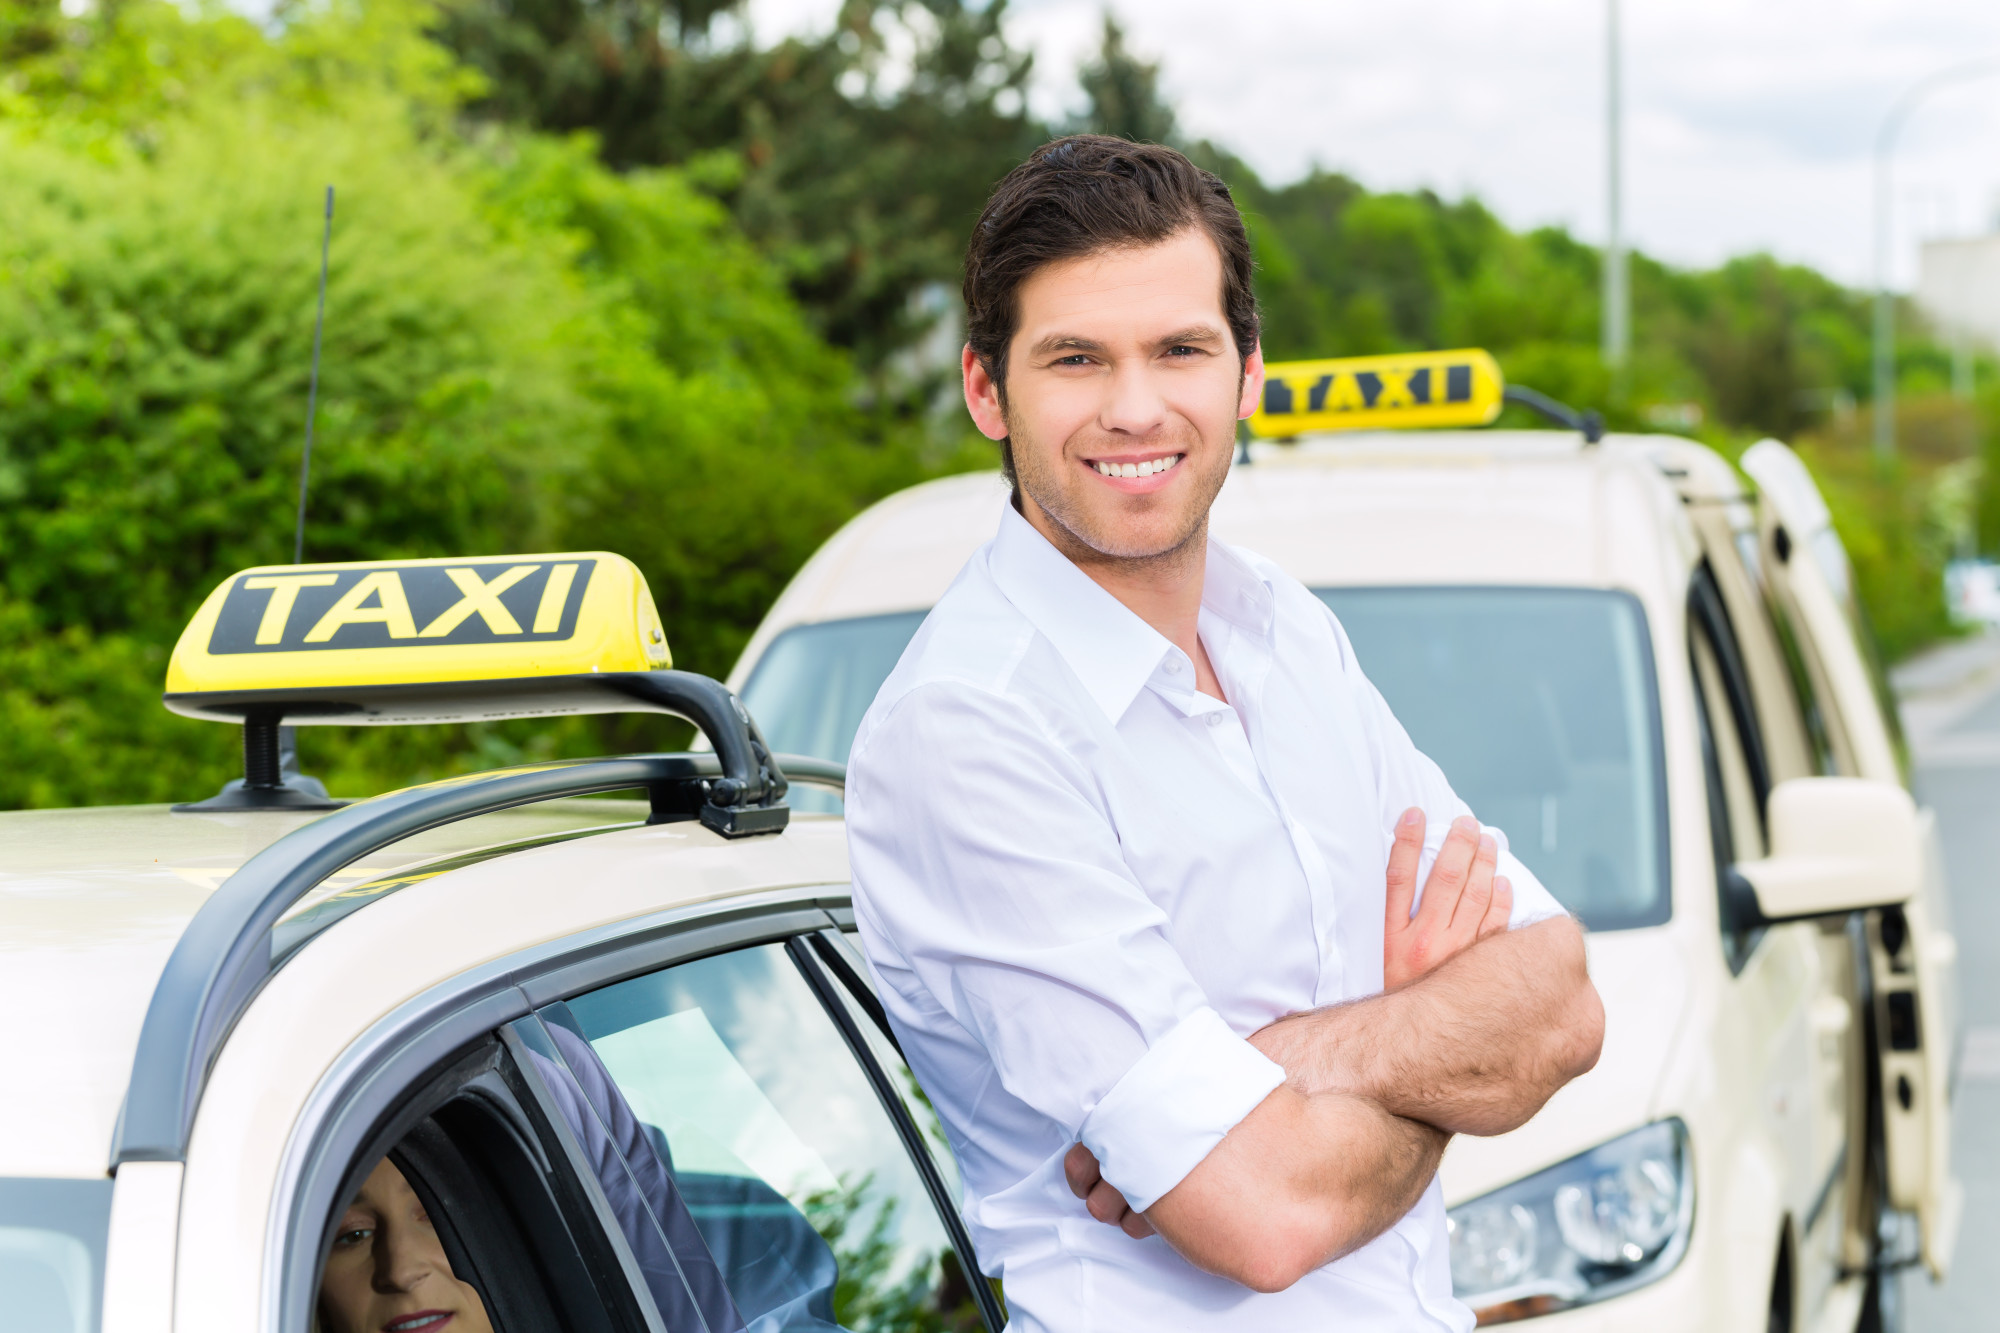 Important Things To Consider Before Getting A Taxi